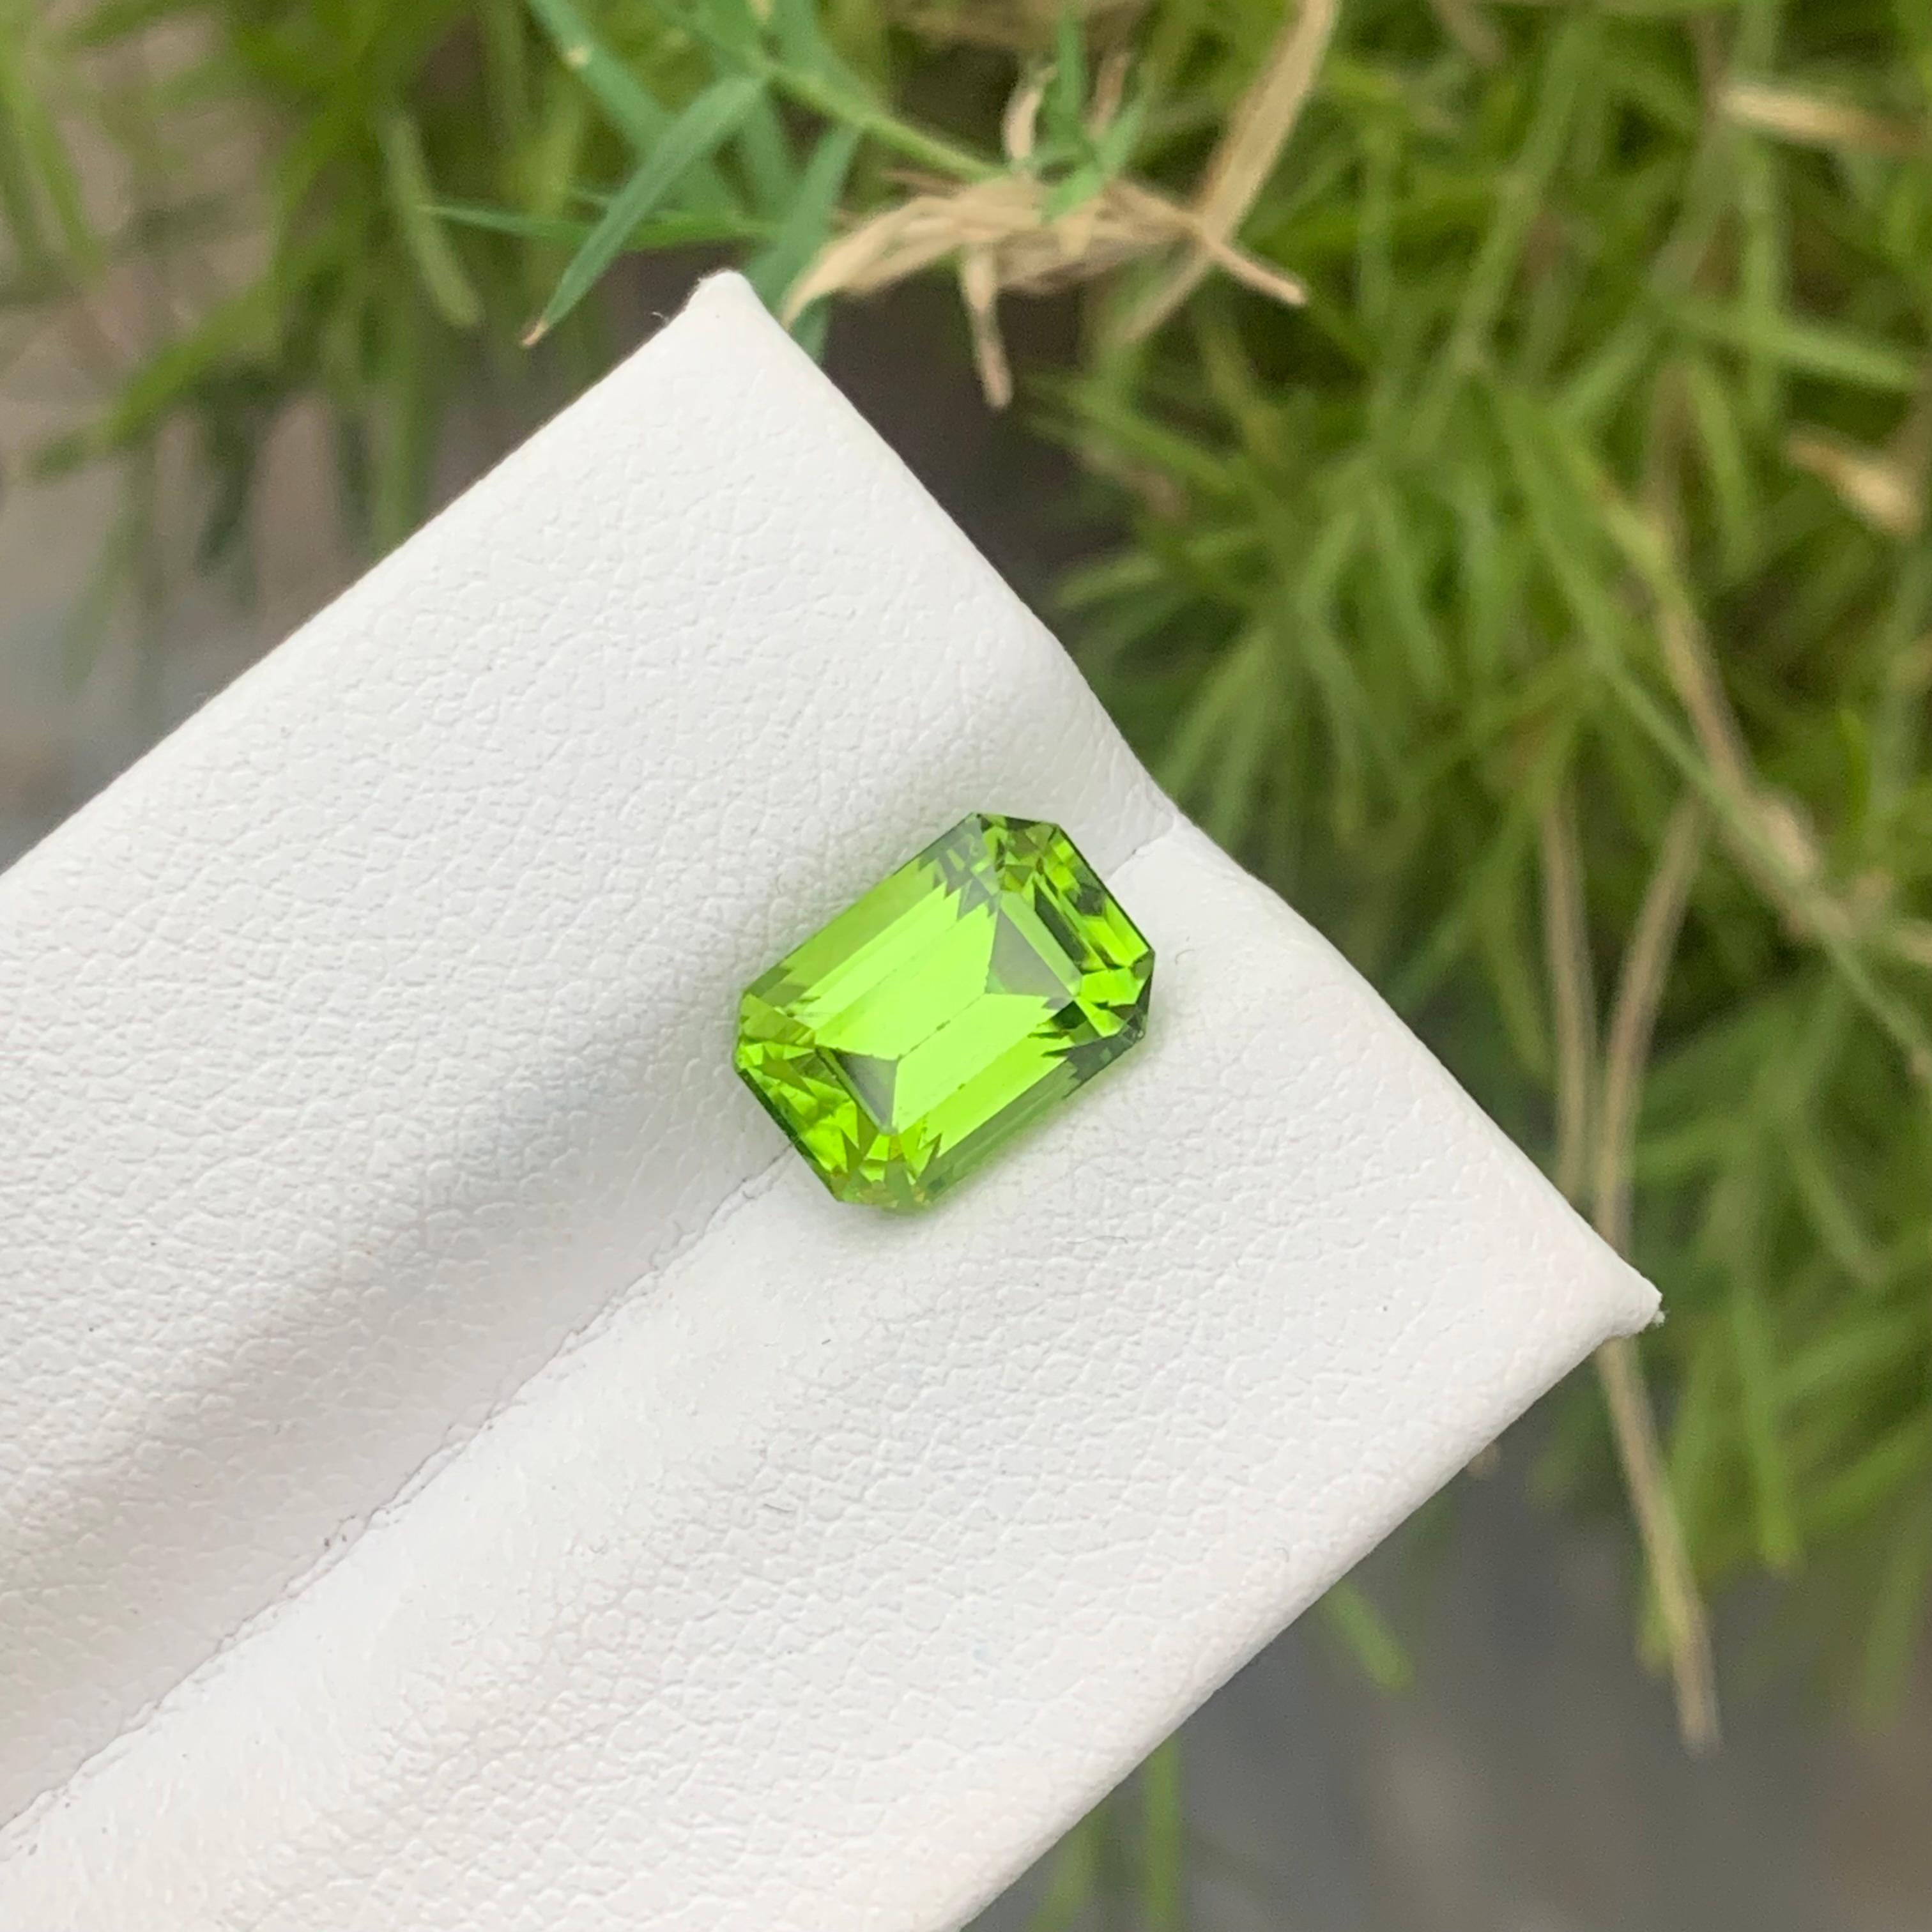 Gorgeous 3.35 Carat Natural Loose Green Peridot Gemstone from Pakistani Mine For Sale 3